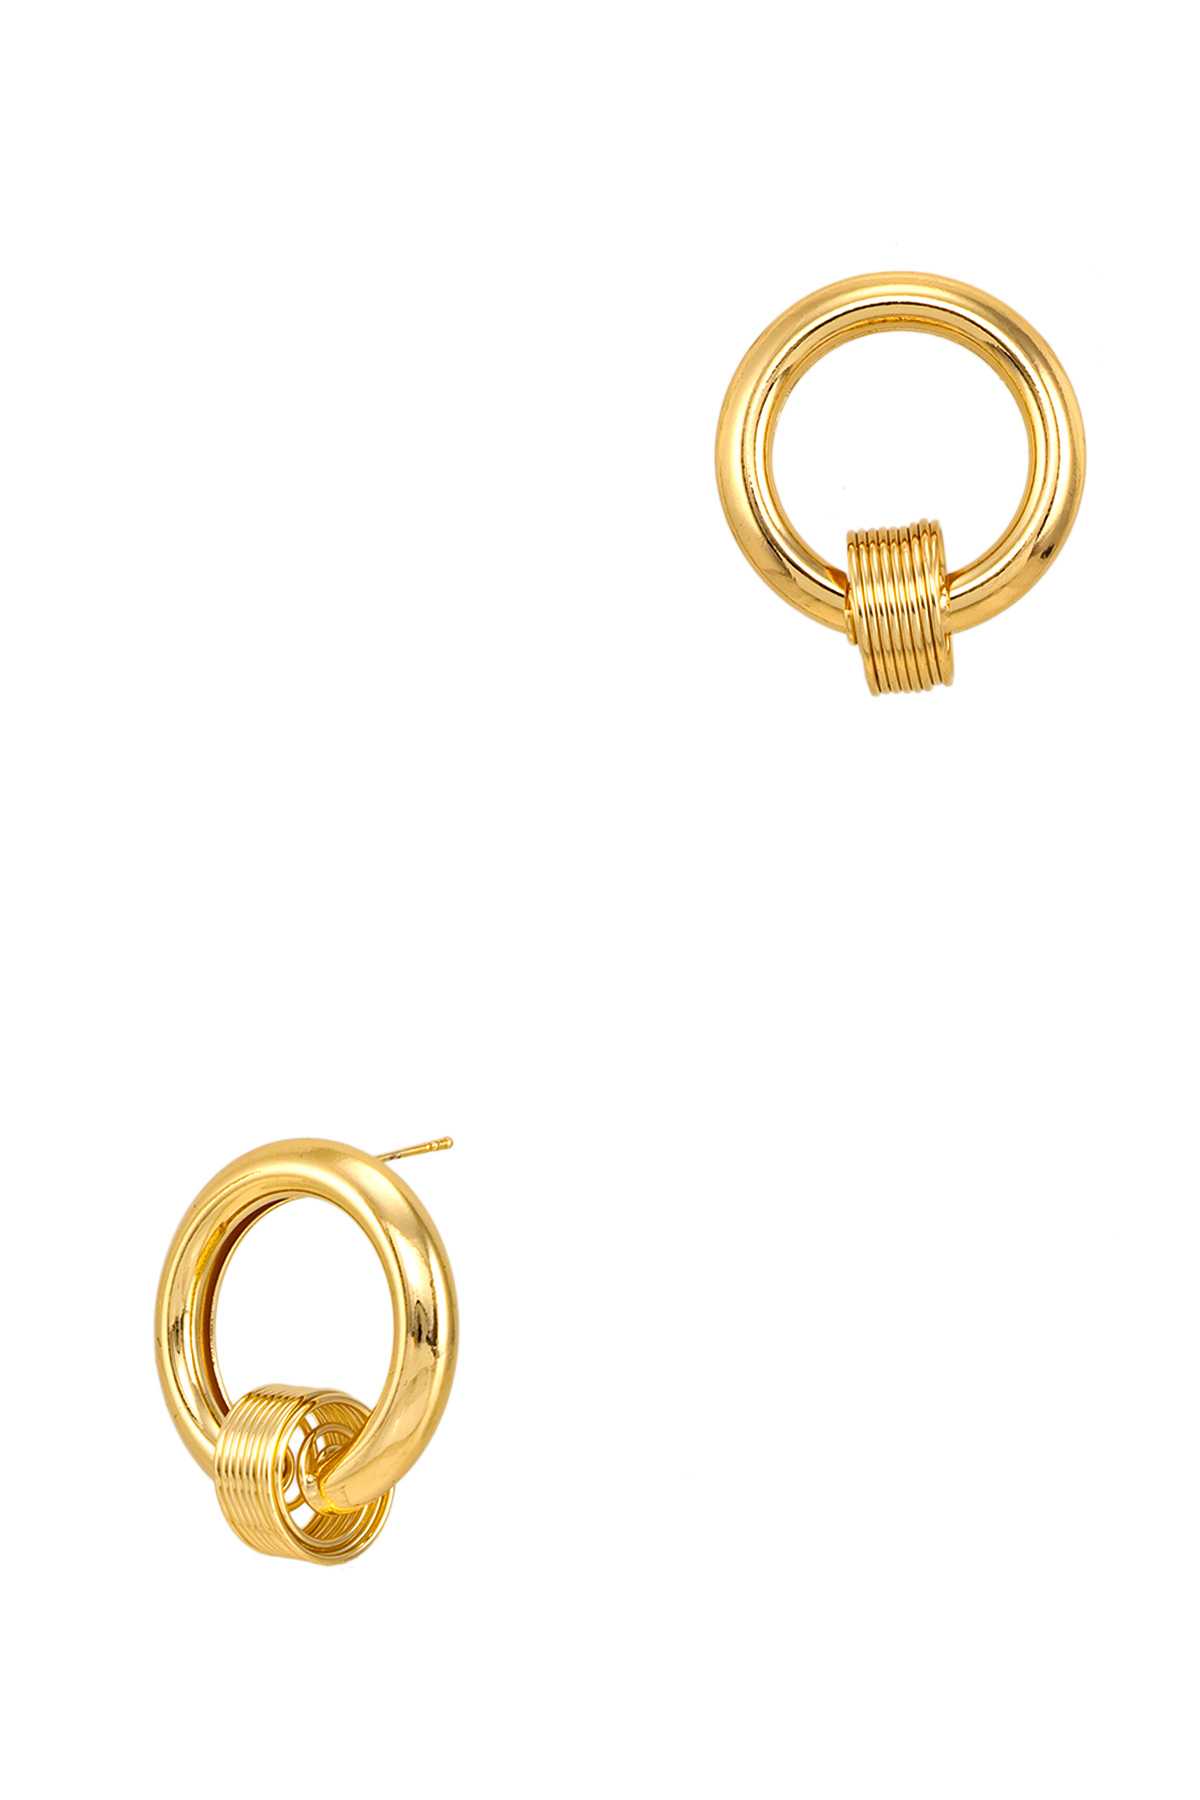 GOLD DIPPED Circle and Spring Earring